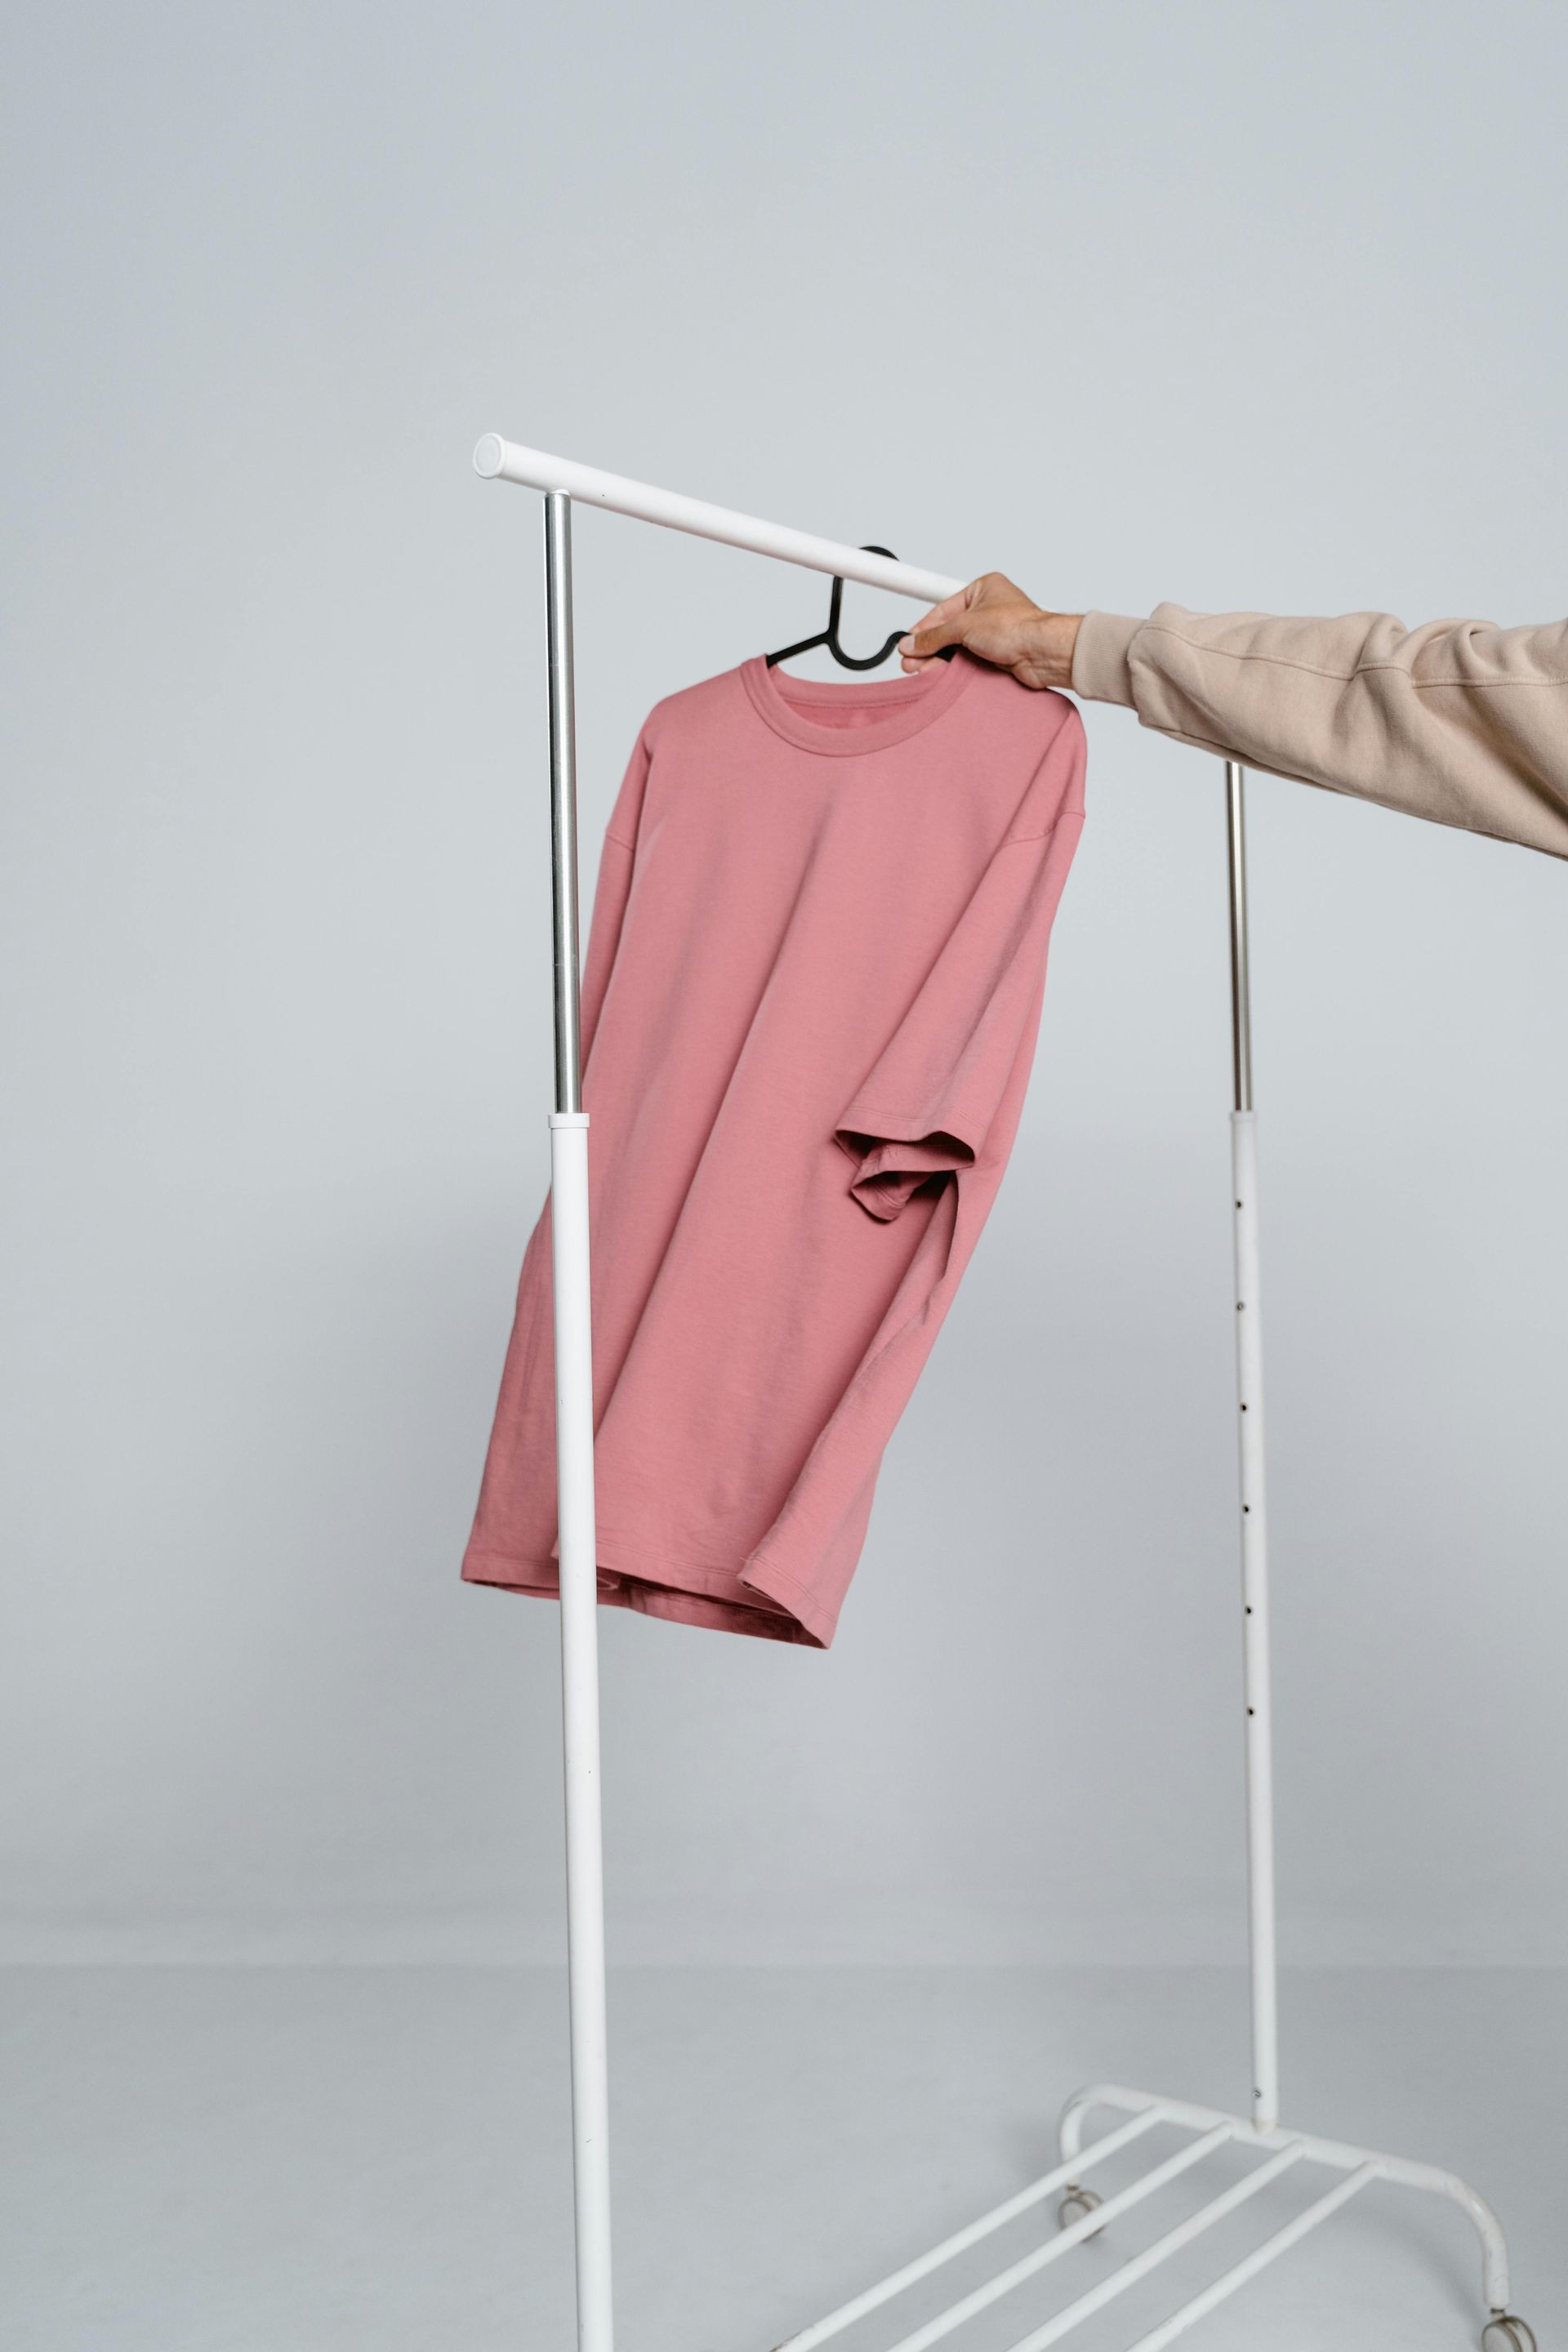 A single pink shirt is hung up on a clothing rack. 